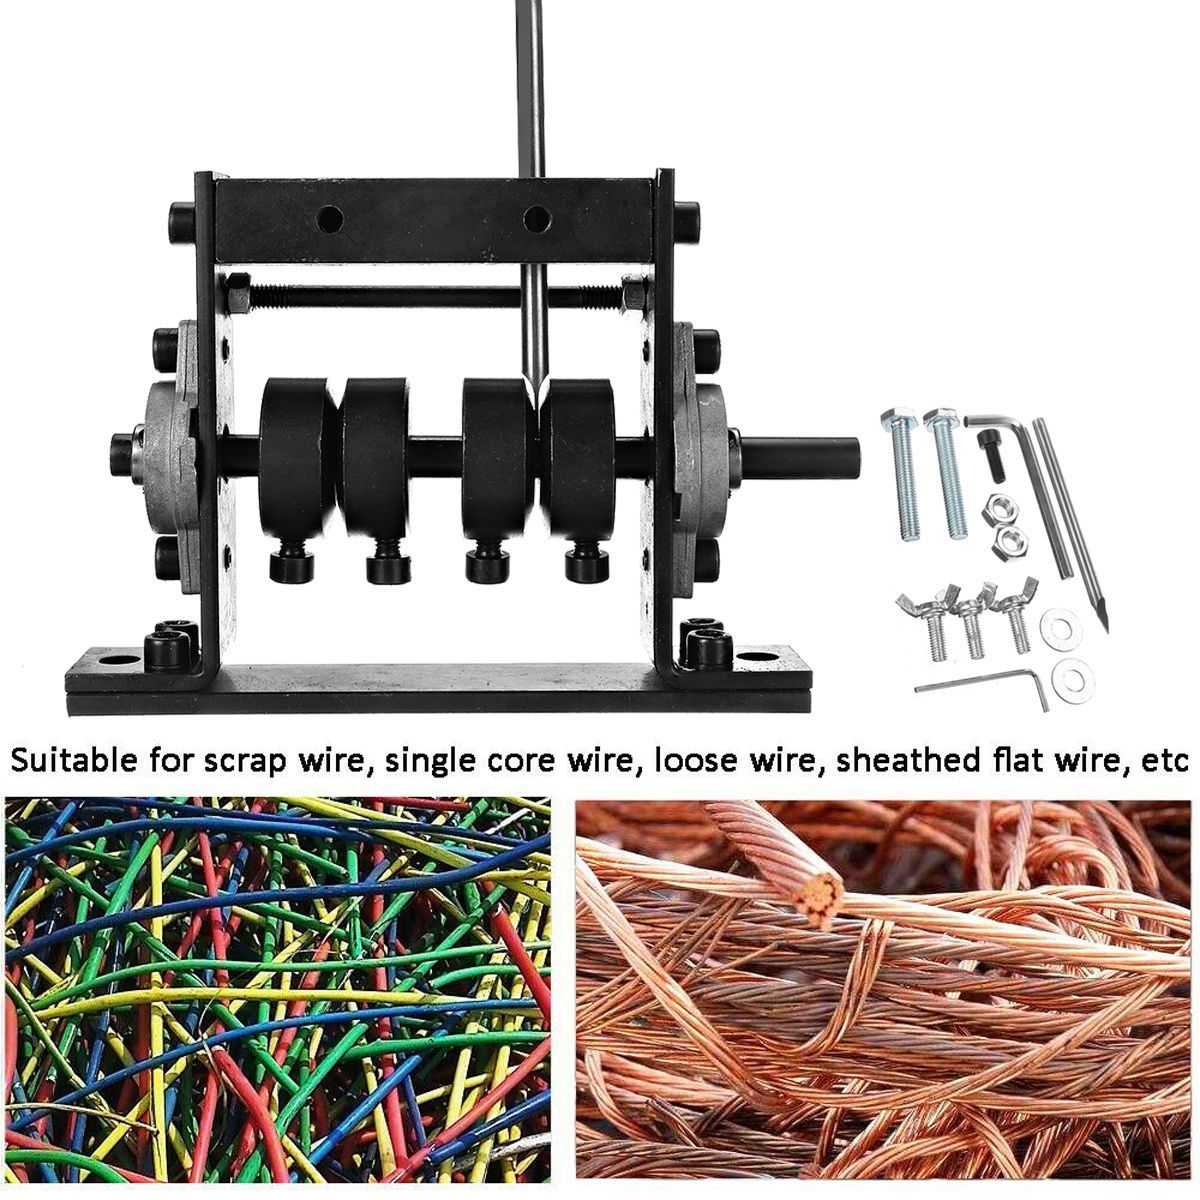 1-30mm-Scrap-Cable-Peeling-Strippers-Fixture-Manual-Copper-Wire-Stripping-Machine-1610884